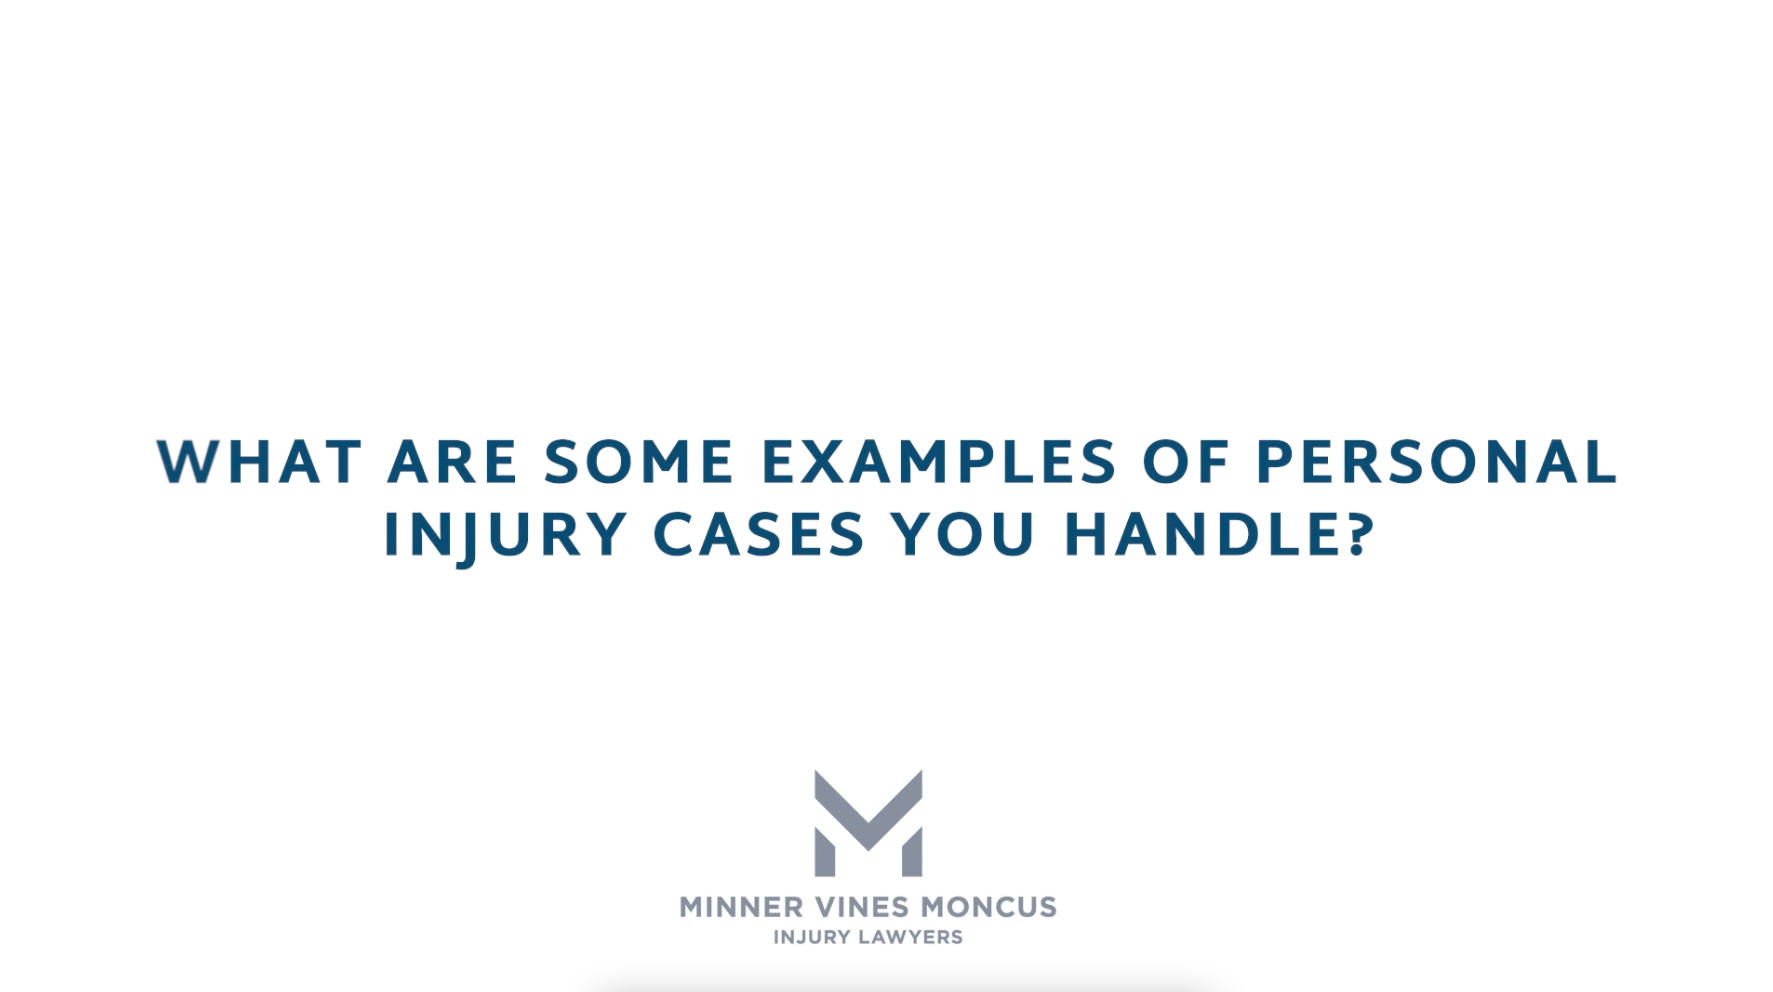 What are some examples of personal injury cases you handle?